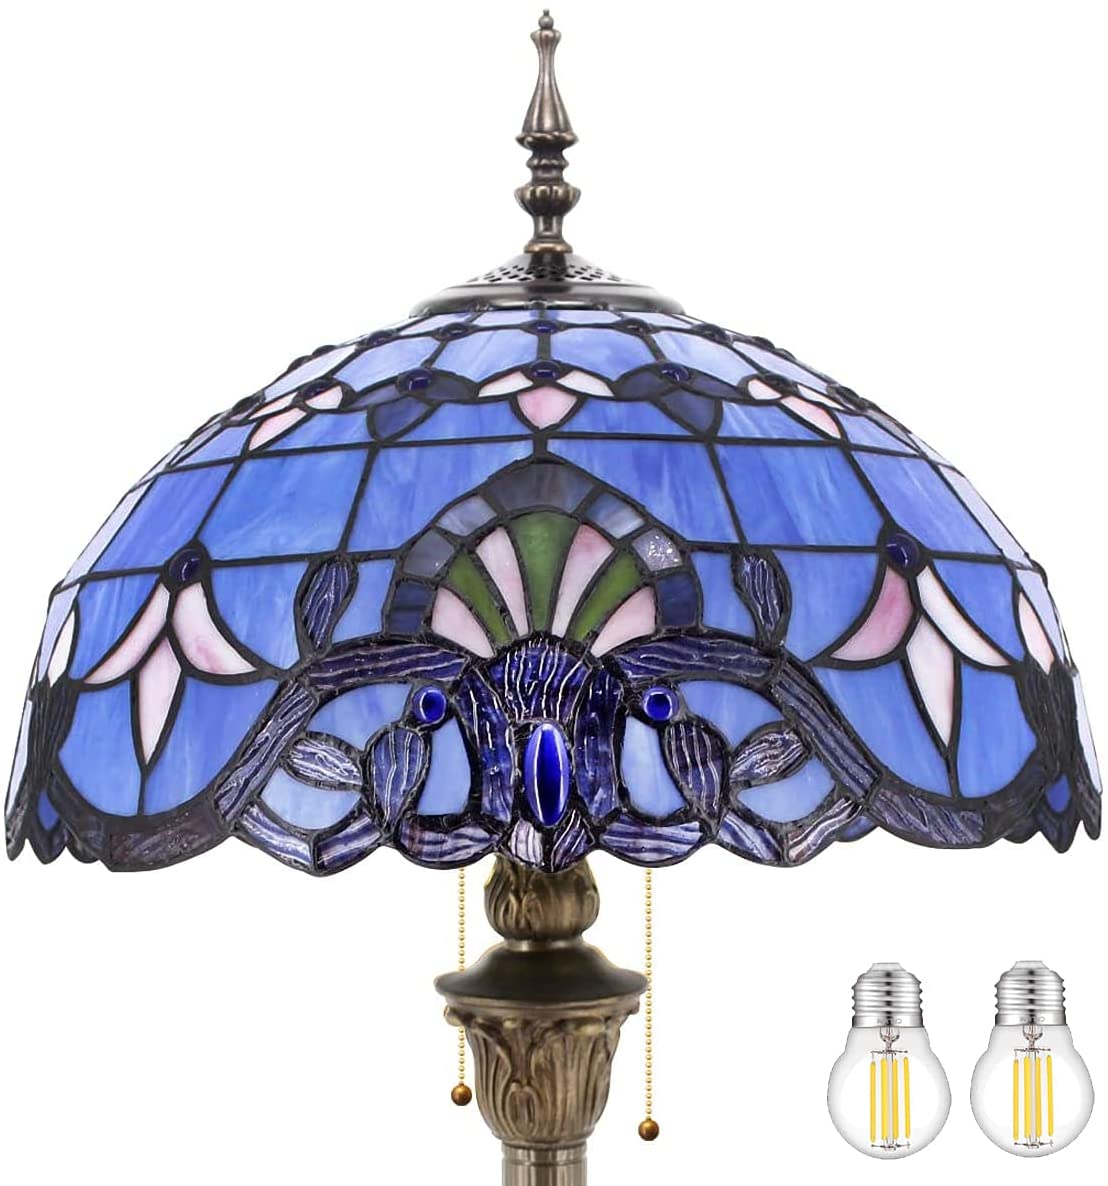 BBNBDMZ  Floor Lamp Blue Purple Baroque Stained Glass Standing Reading Light 16X16X64 Inches Antique Pole Corner Lamp Decor Bedroom Living Room  Office S003C Series